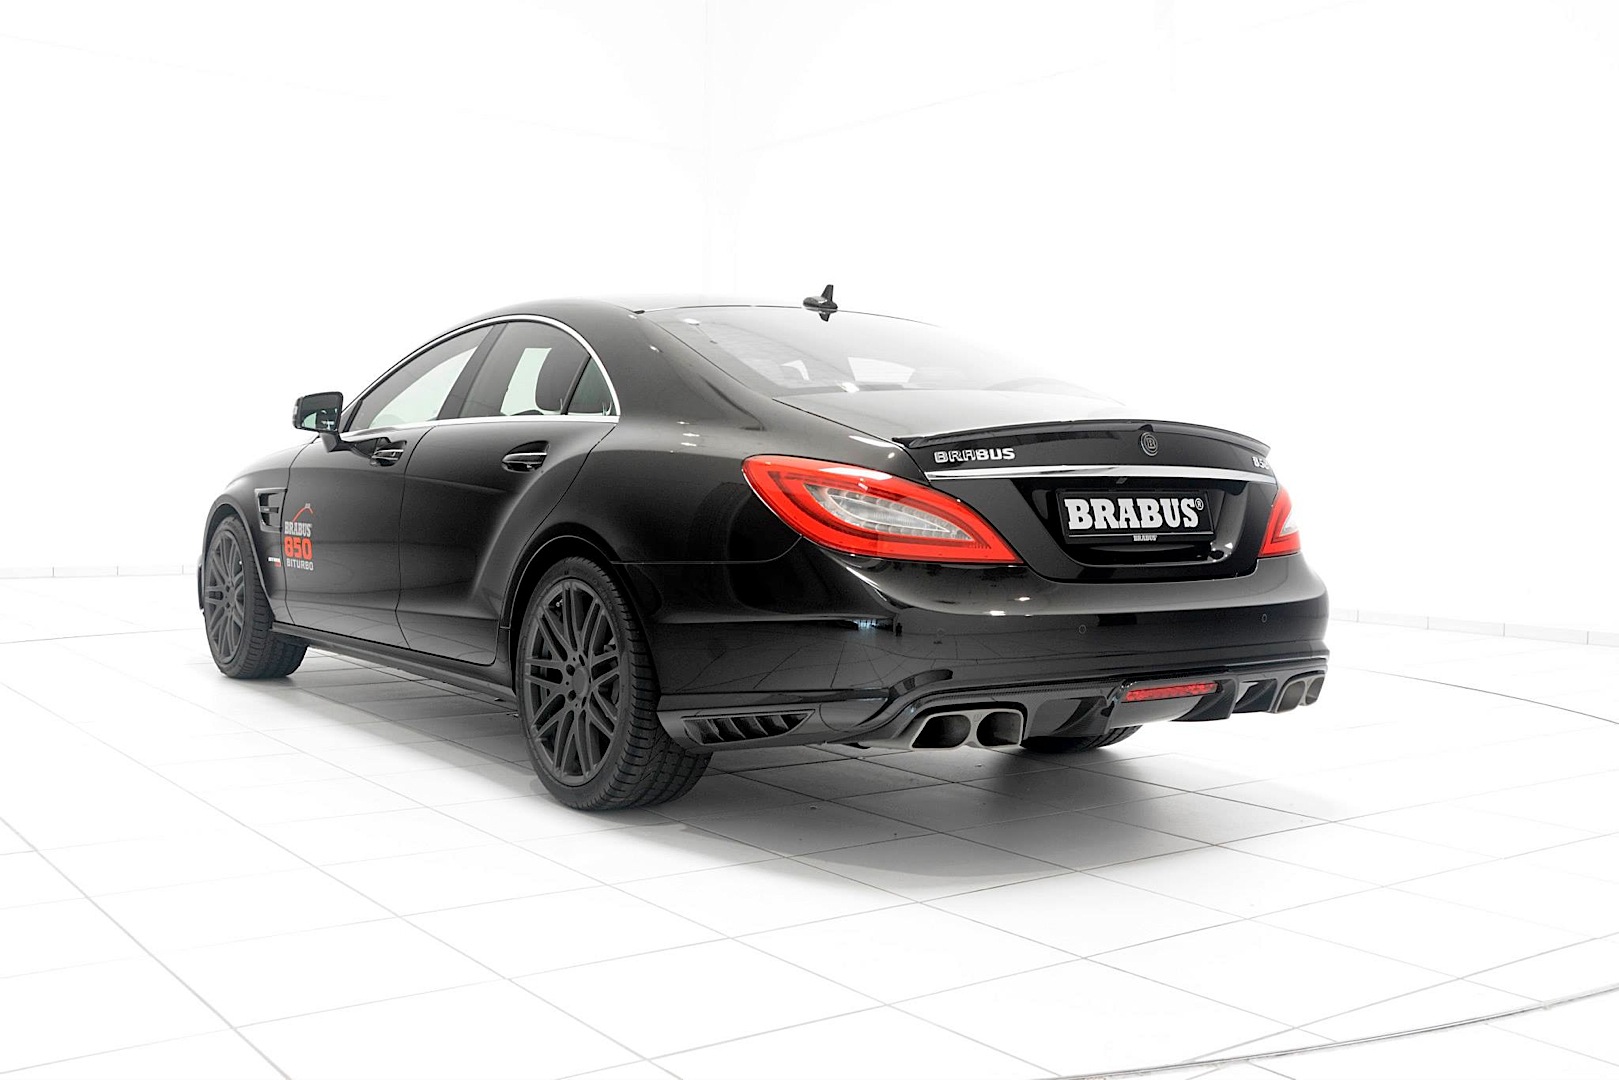 Cls 63 Amg By Fi Exhausts Sounds Both Mellow And Angry